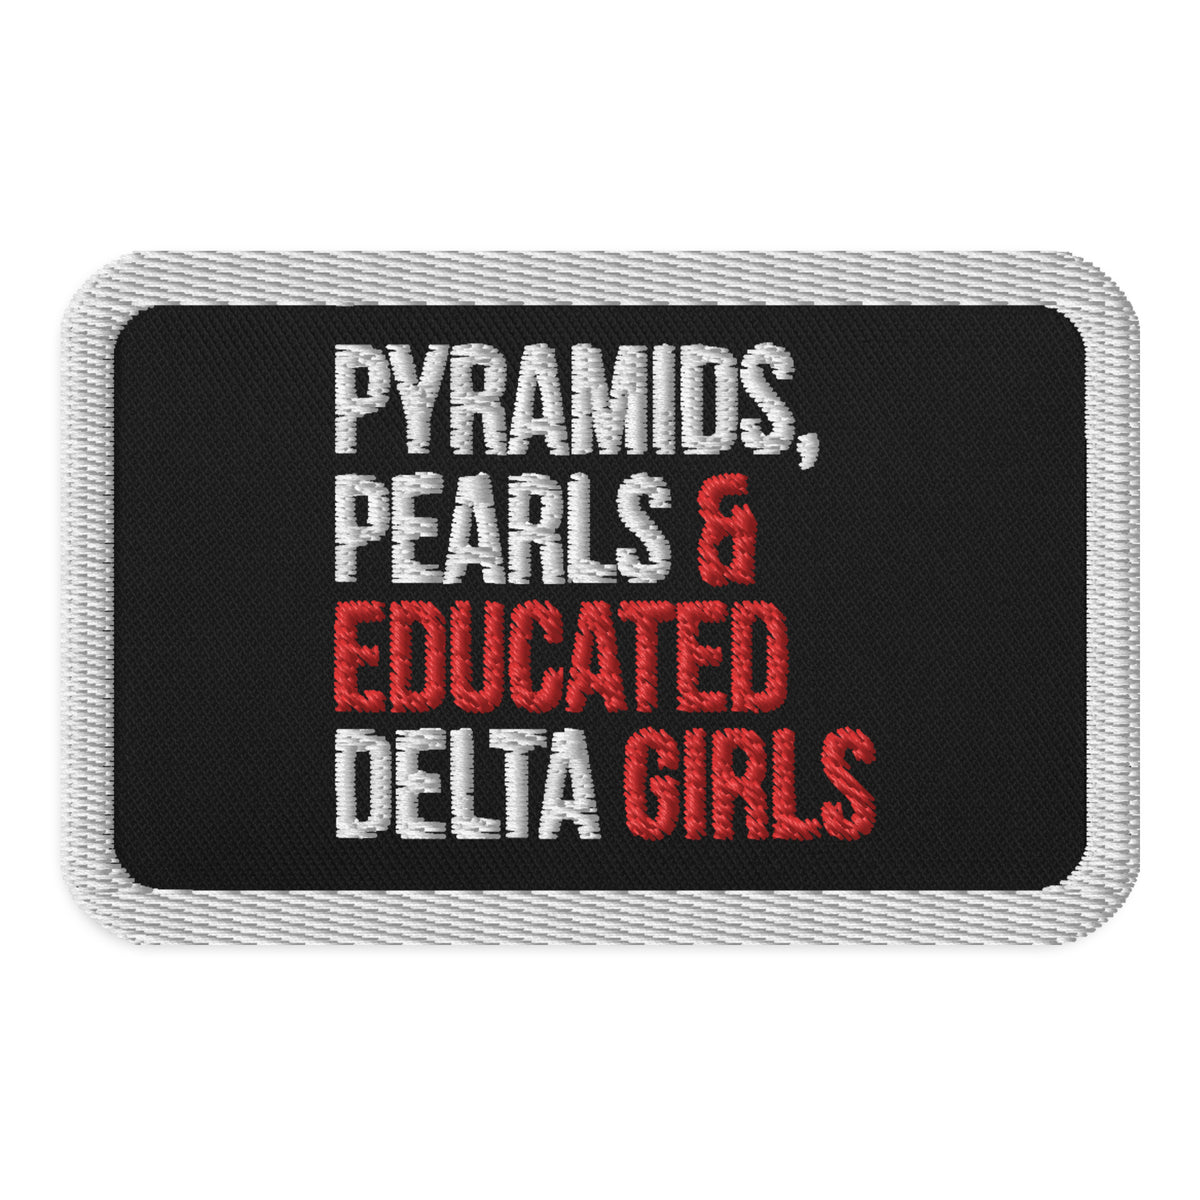 Embroidered Pyramids Pearls & Educated Delta Girls Embroidered Patch - White